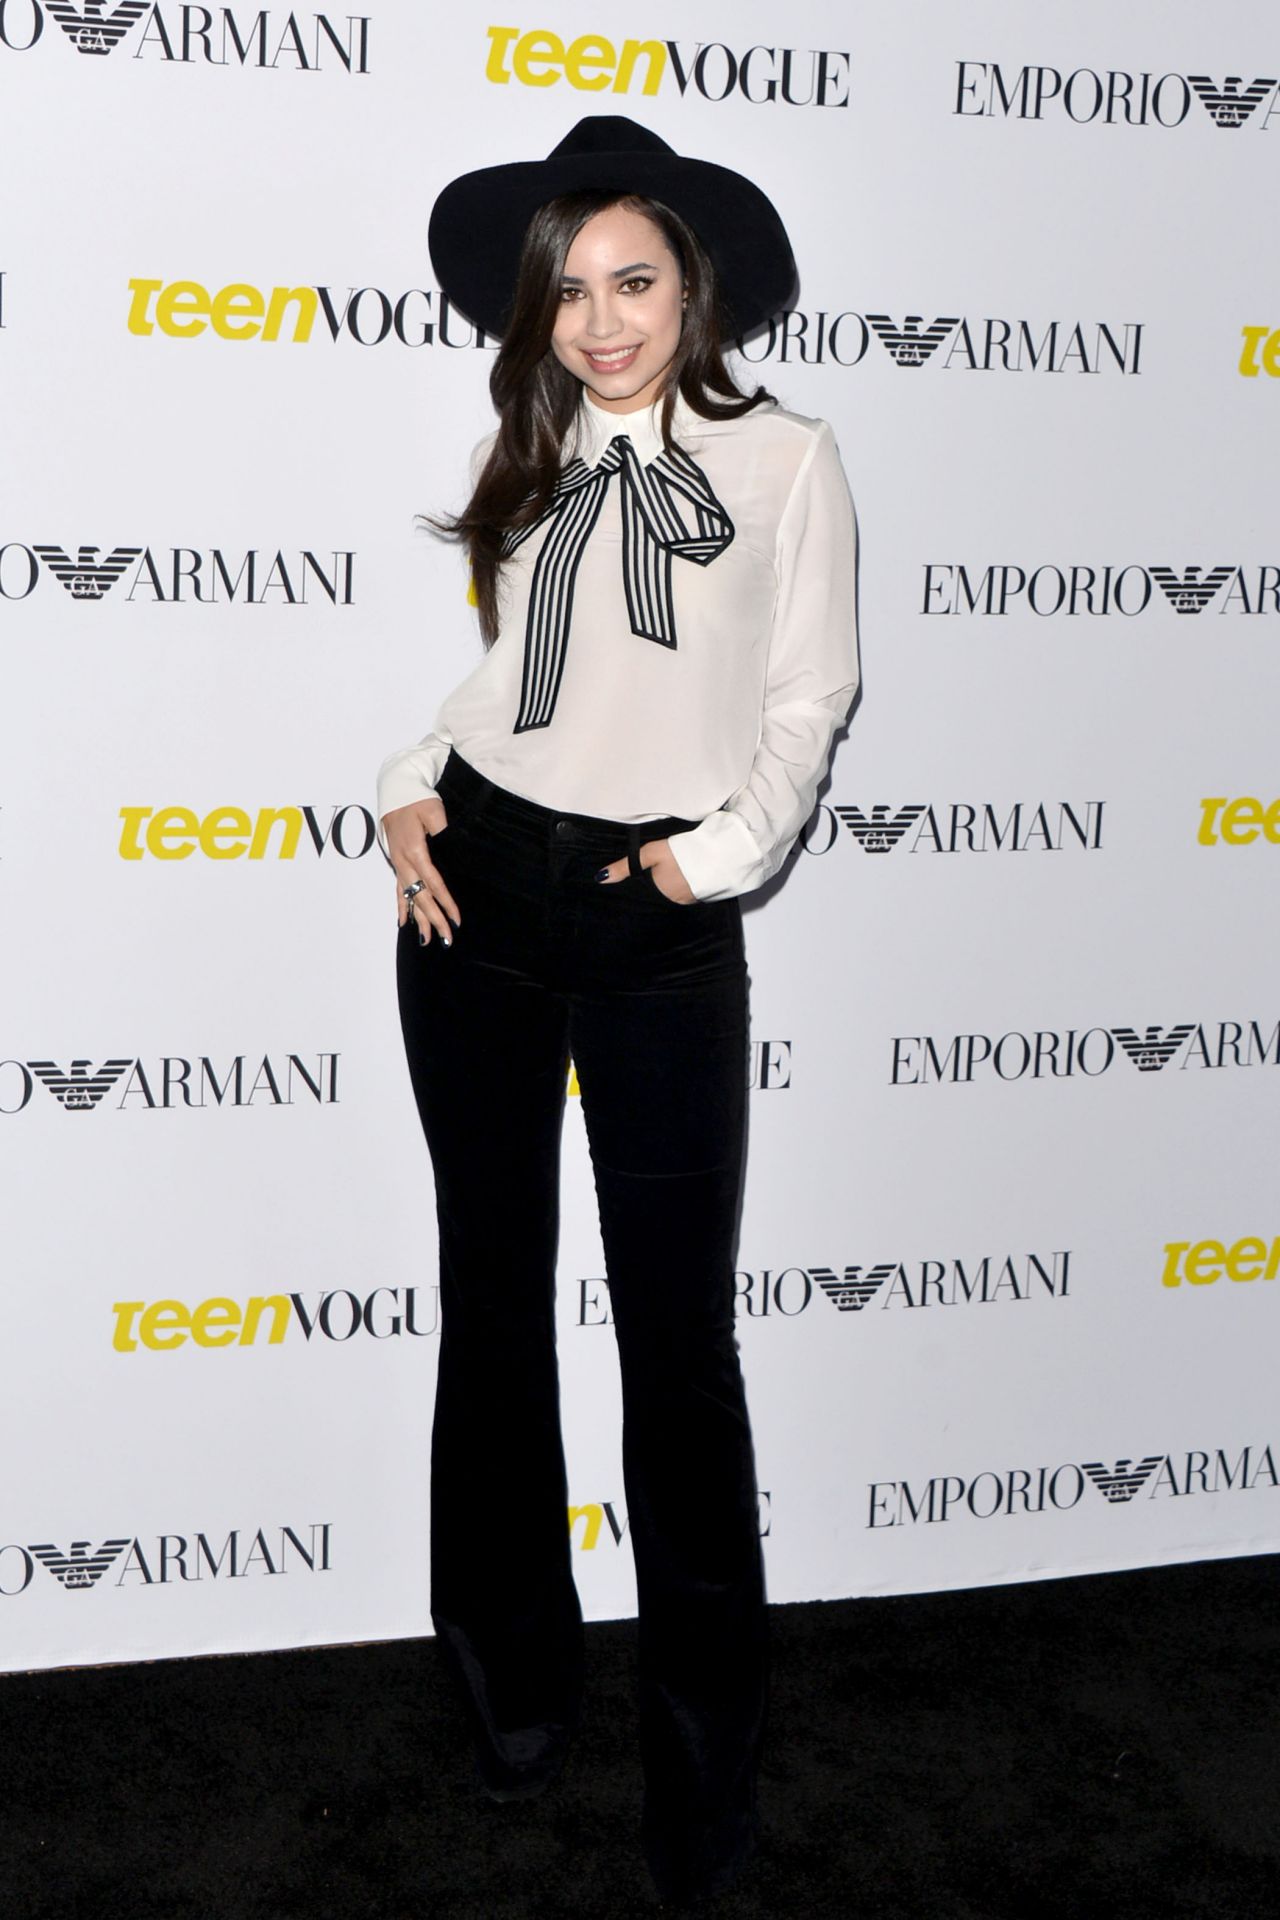 sofia-carson-2015-teen-vogue-young-hollywood-issue-launch-party-in-los-angeles_2